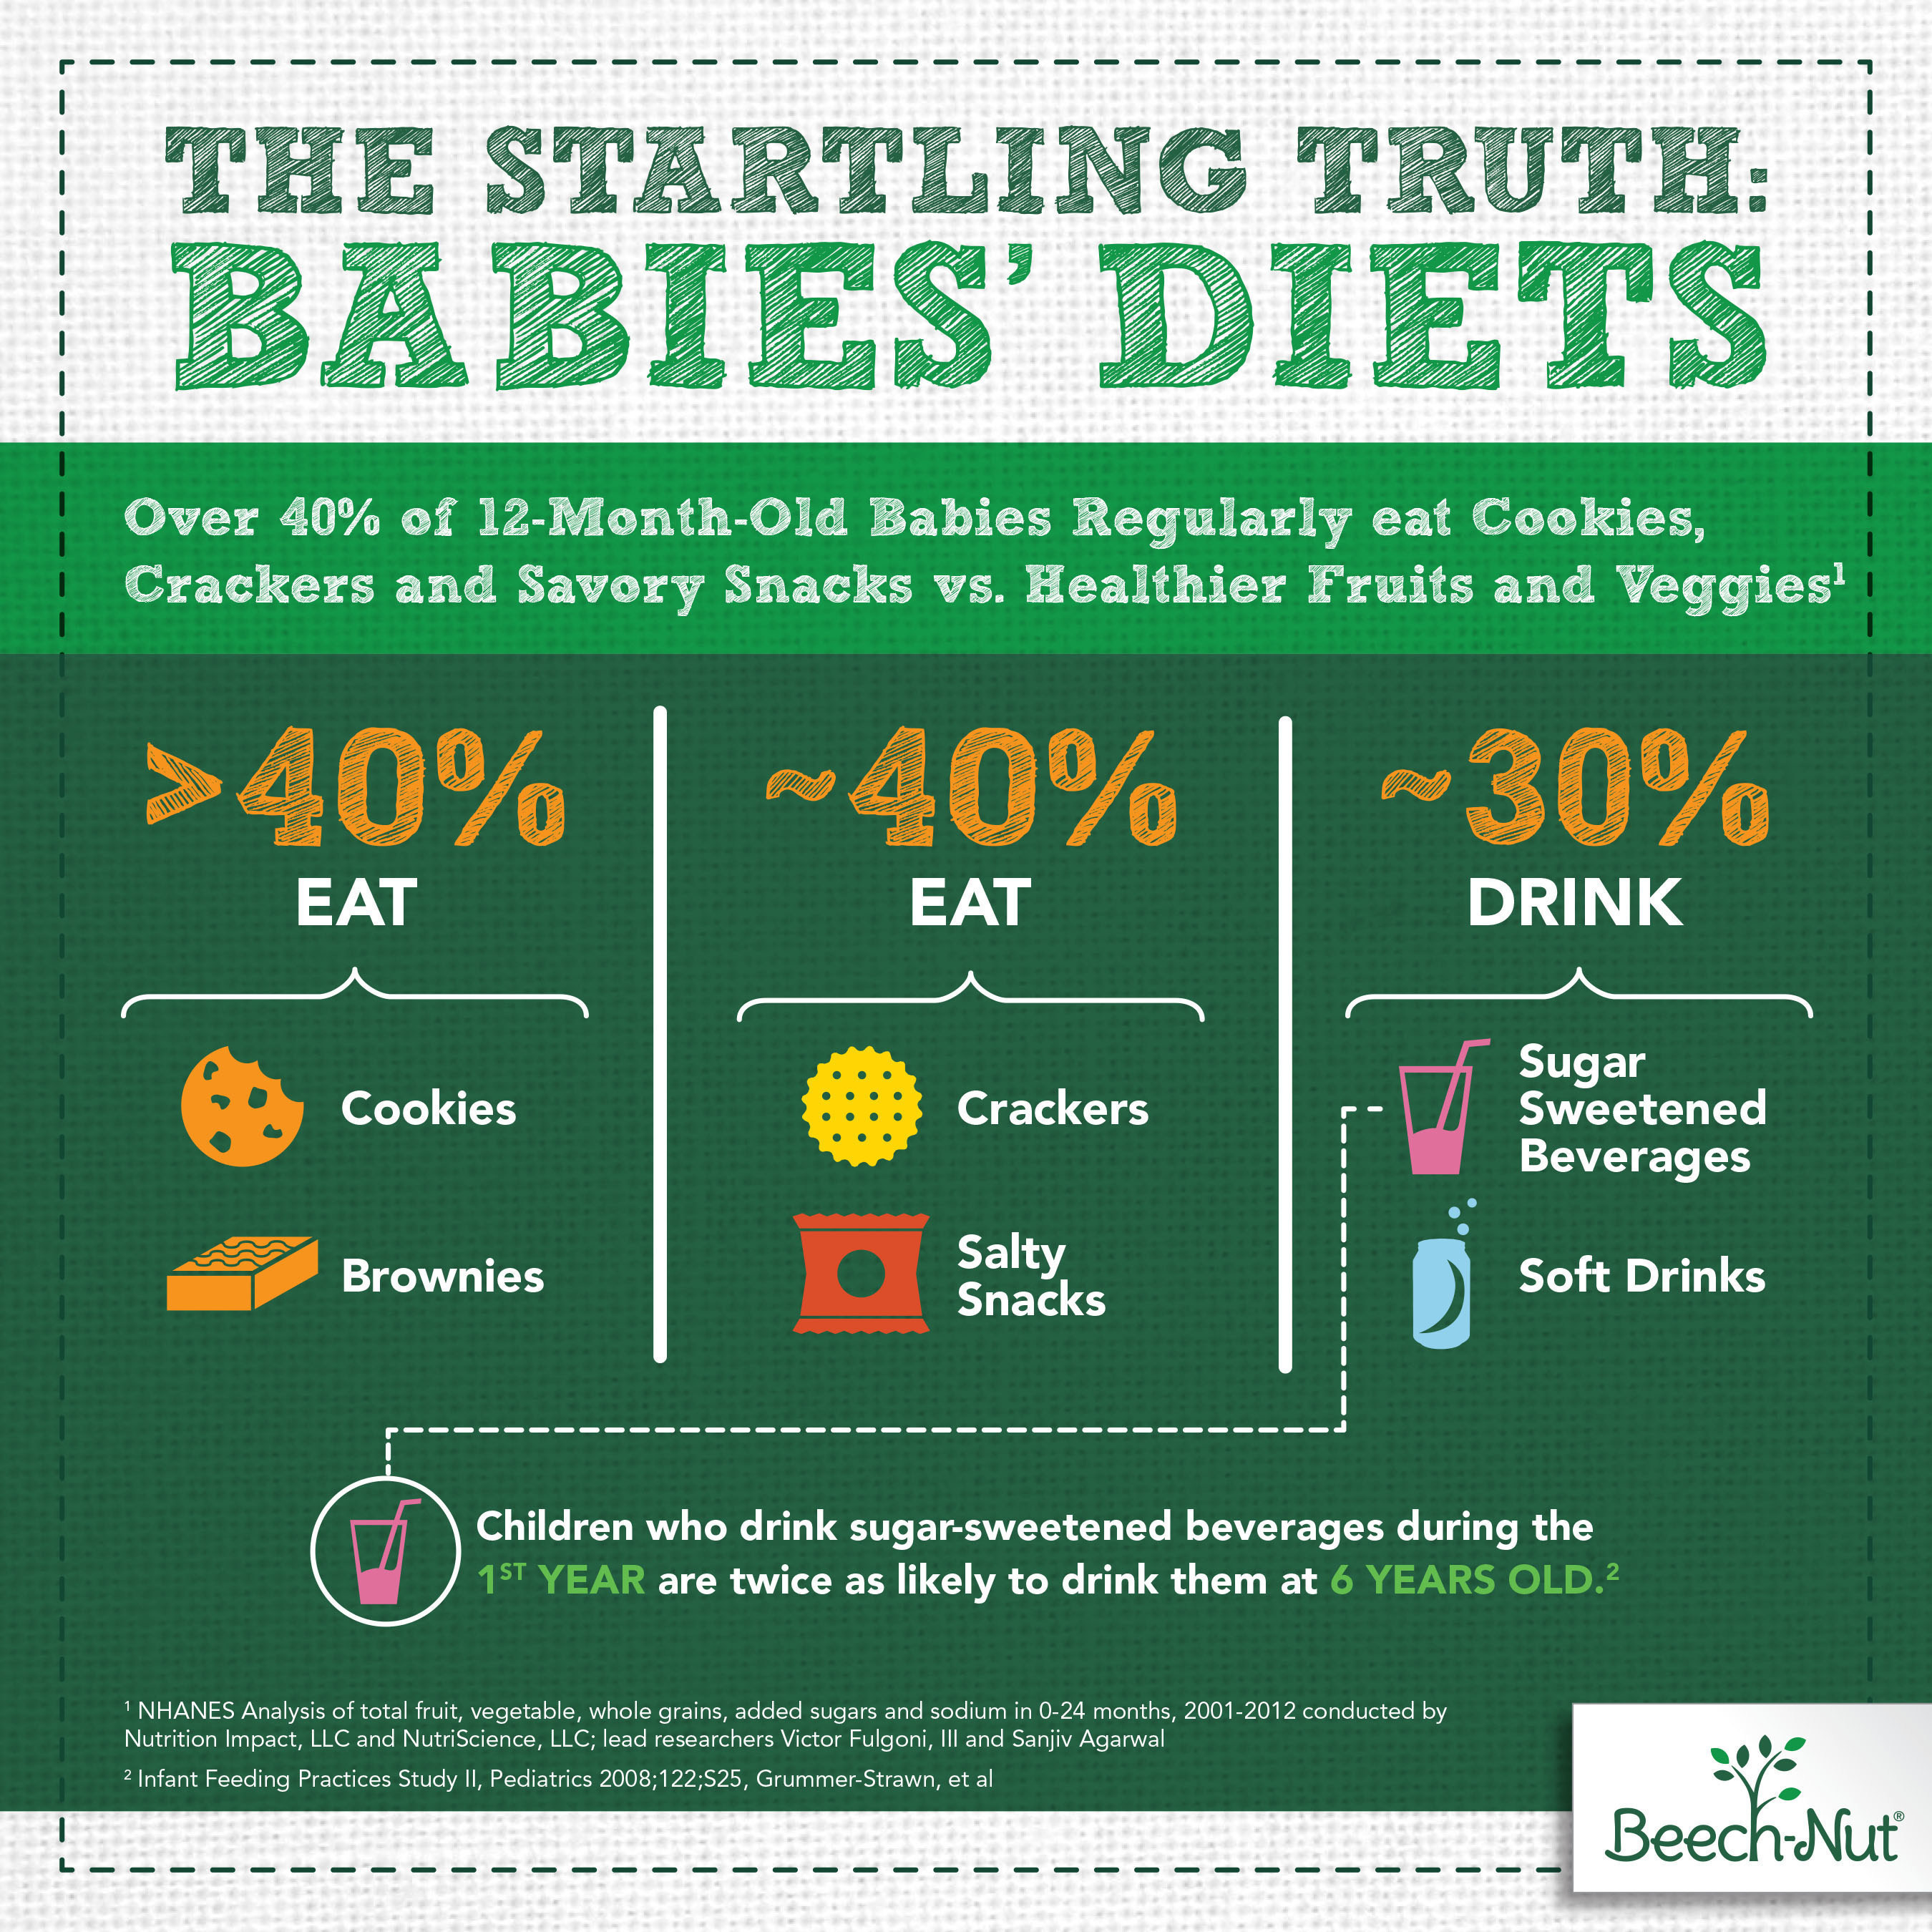 The Startling Truth: Babies' Diets